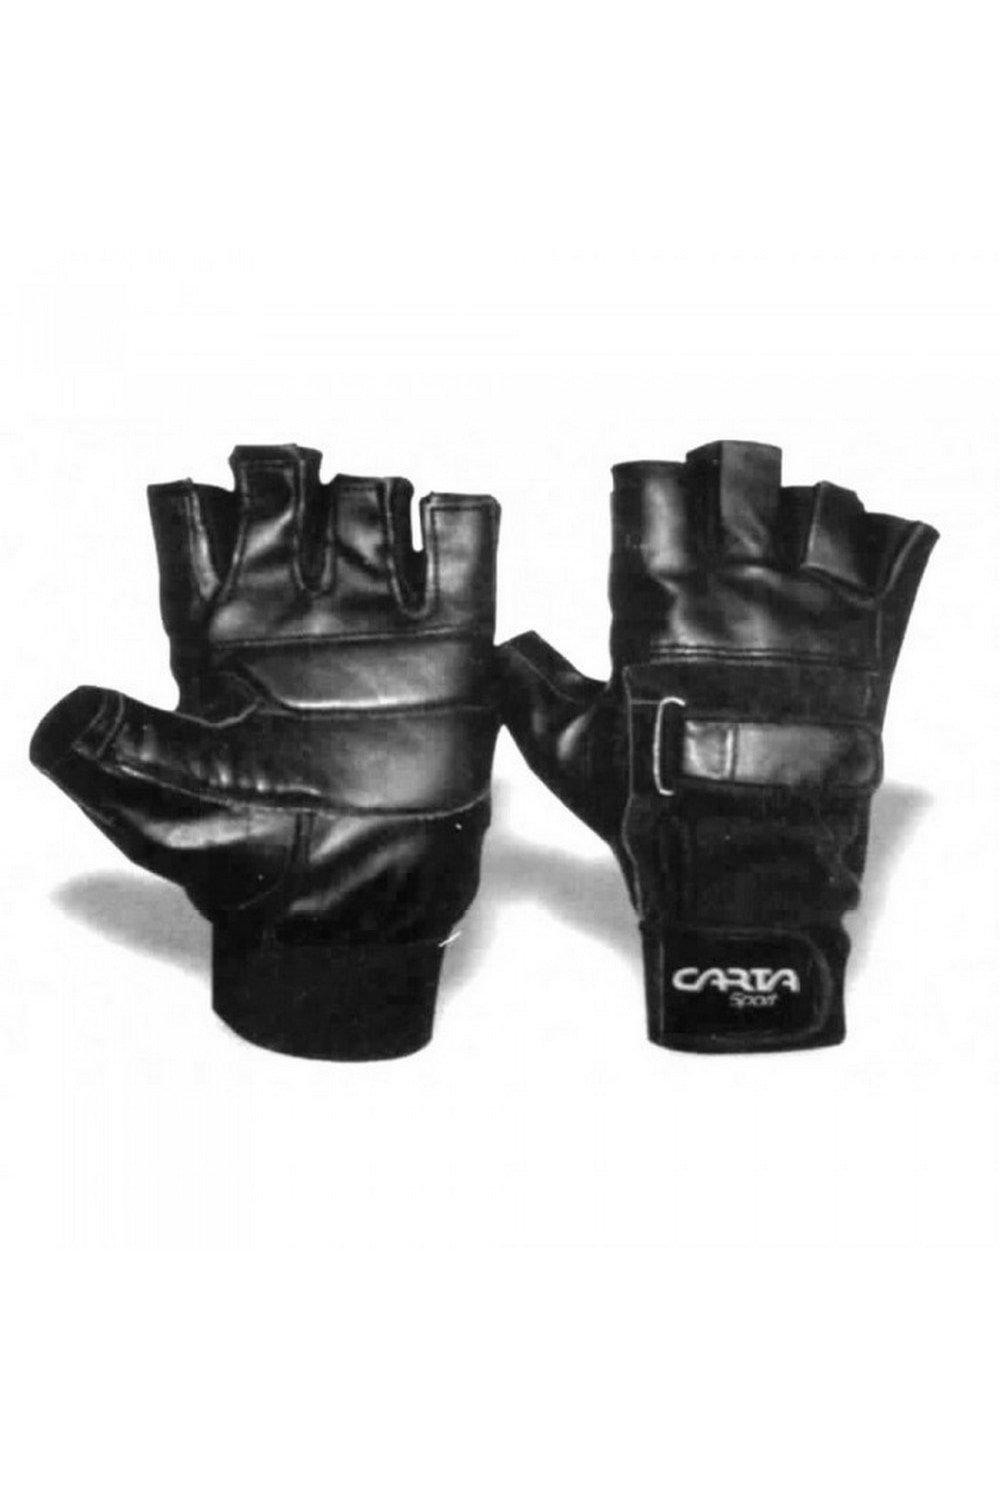 Carta Sport Touch Fastening Double Weightlifting Gloves|Size: L|black